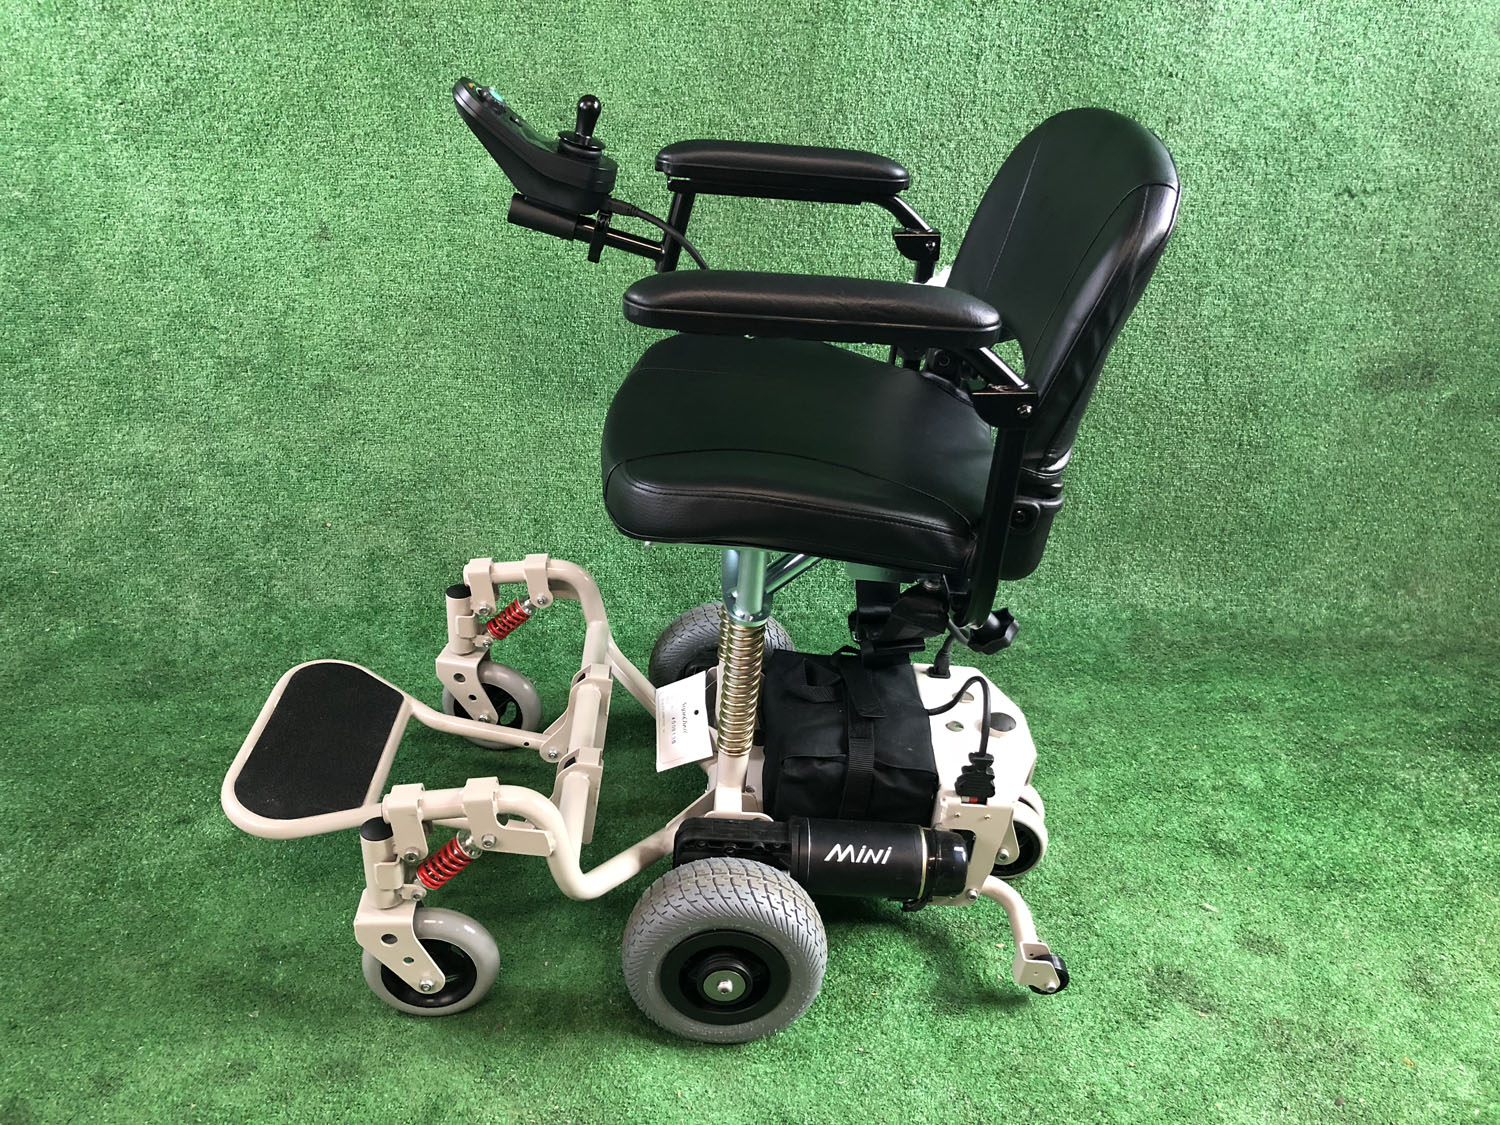 New SupaChair Mini Lightweight Transportable Powerchair with Suspension